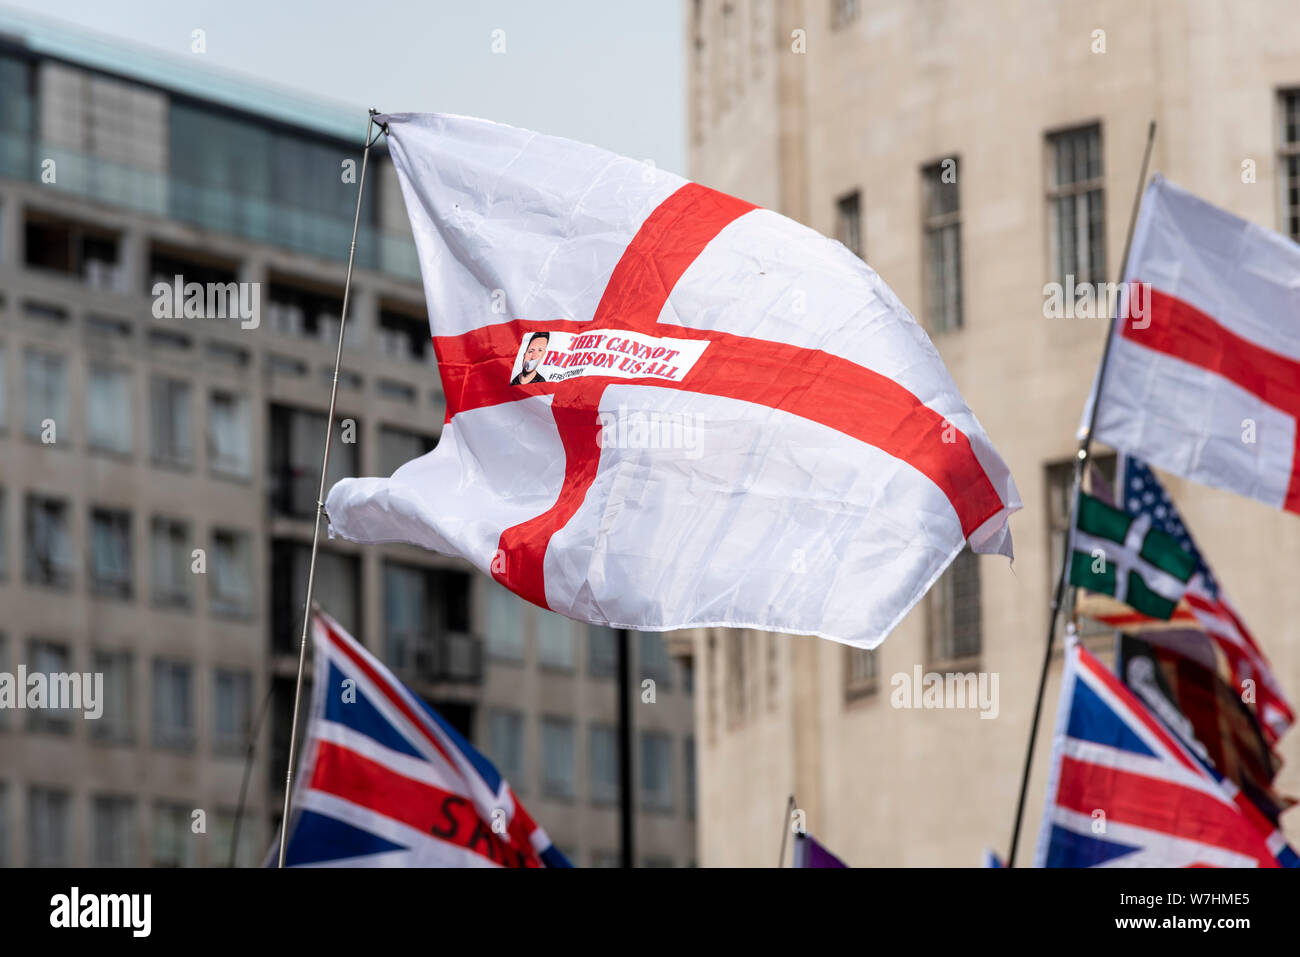 They cannot imprison us all England flag at Free Tommy Robinson protest rally In London, UK Stock Photo